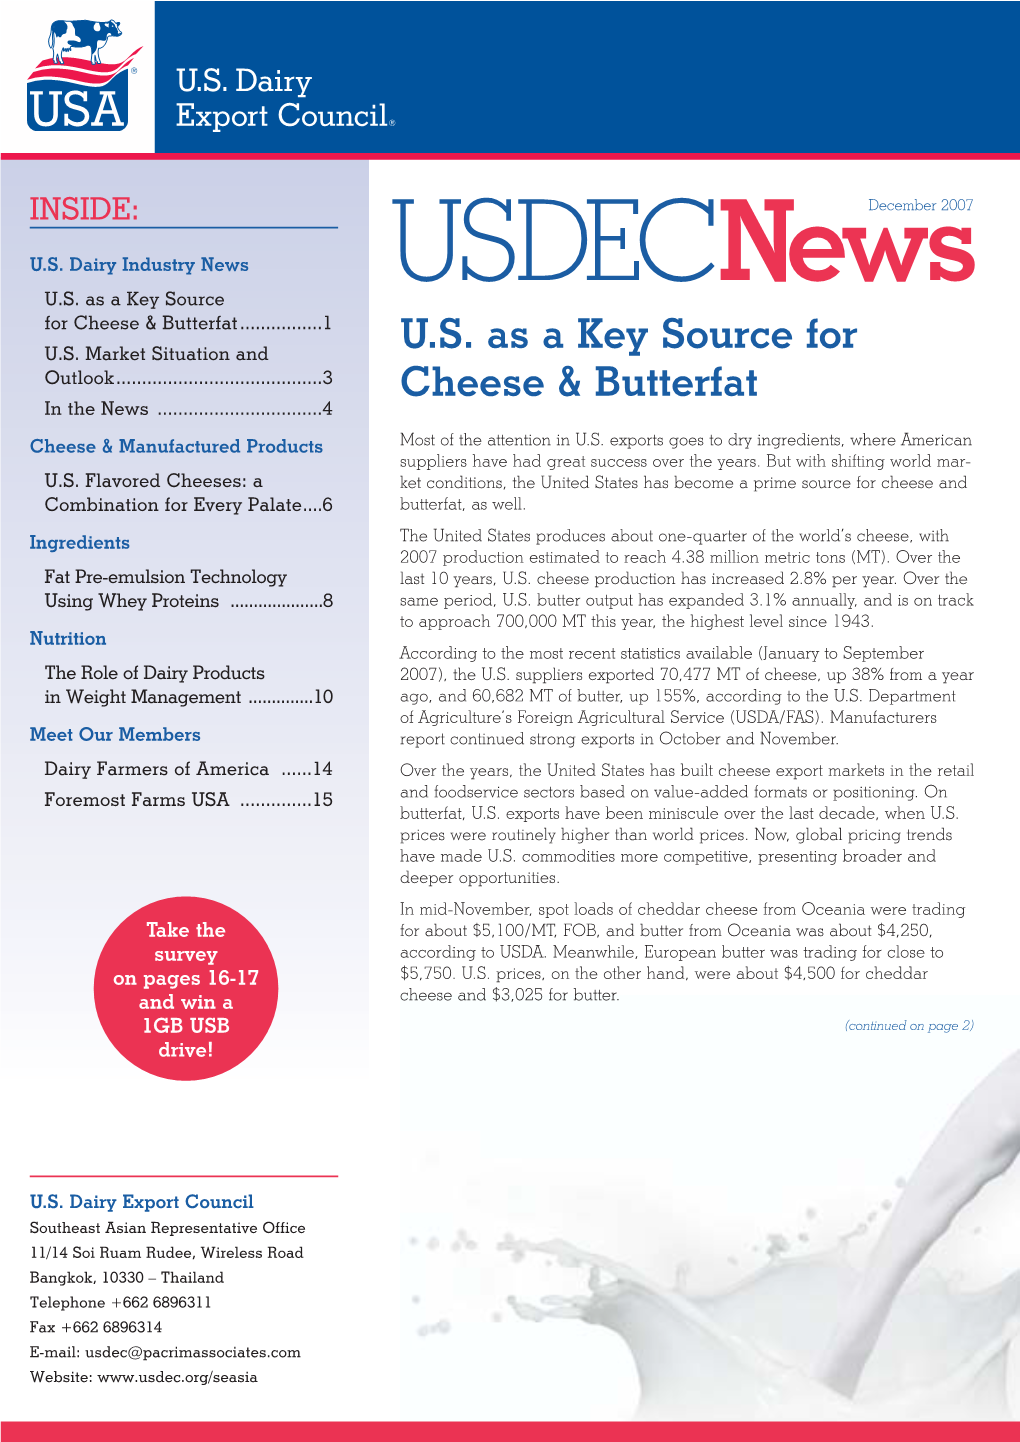 U.S. As a Key Source for Cheese & Butterfat